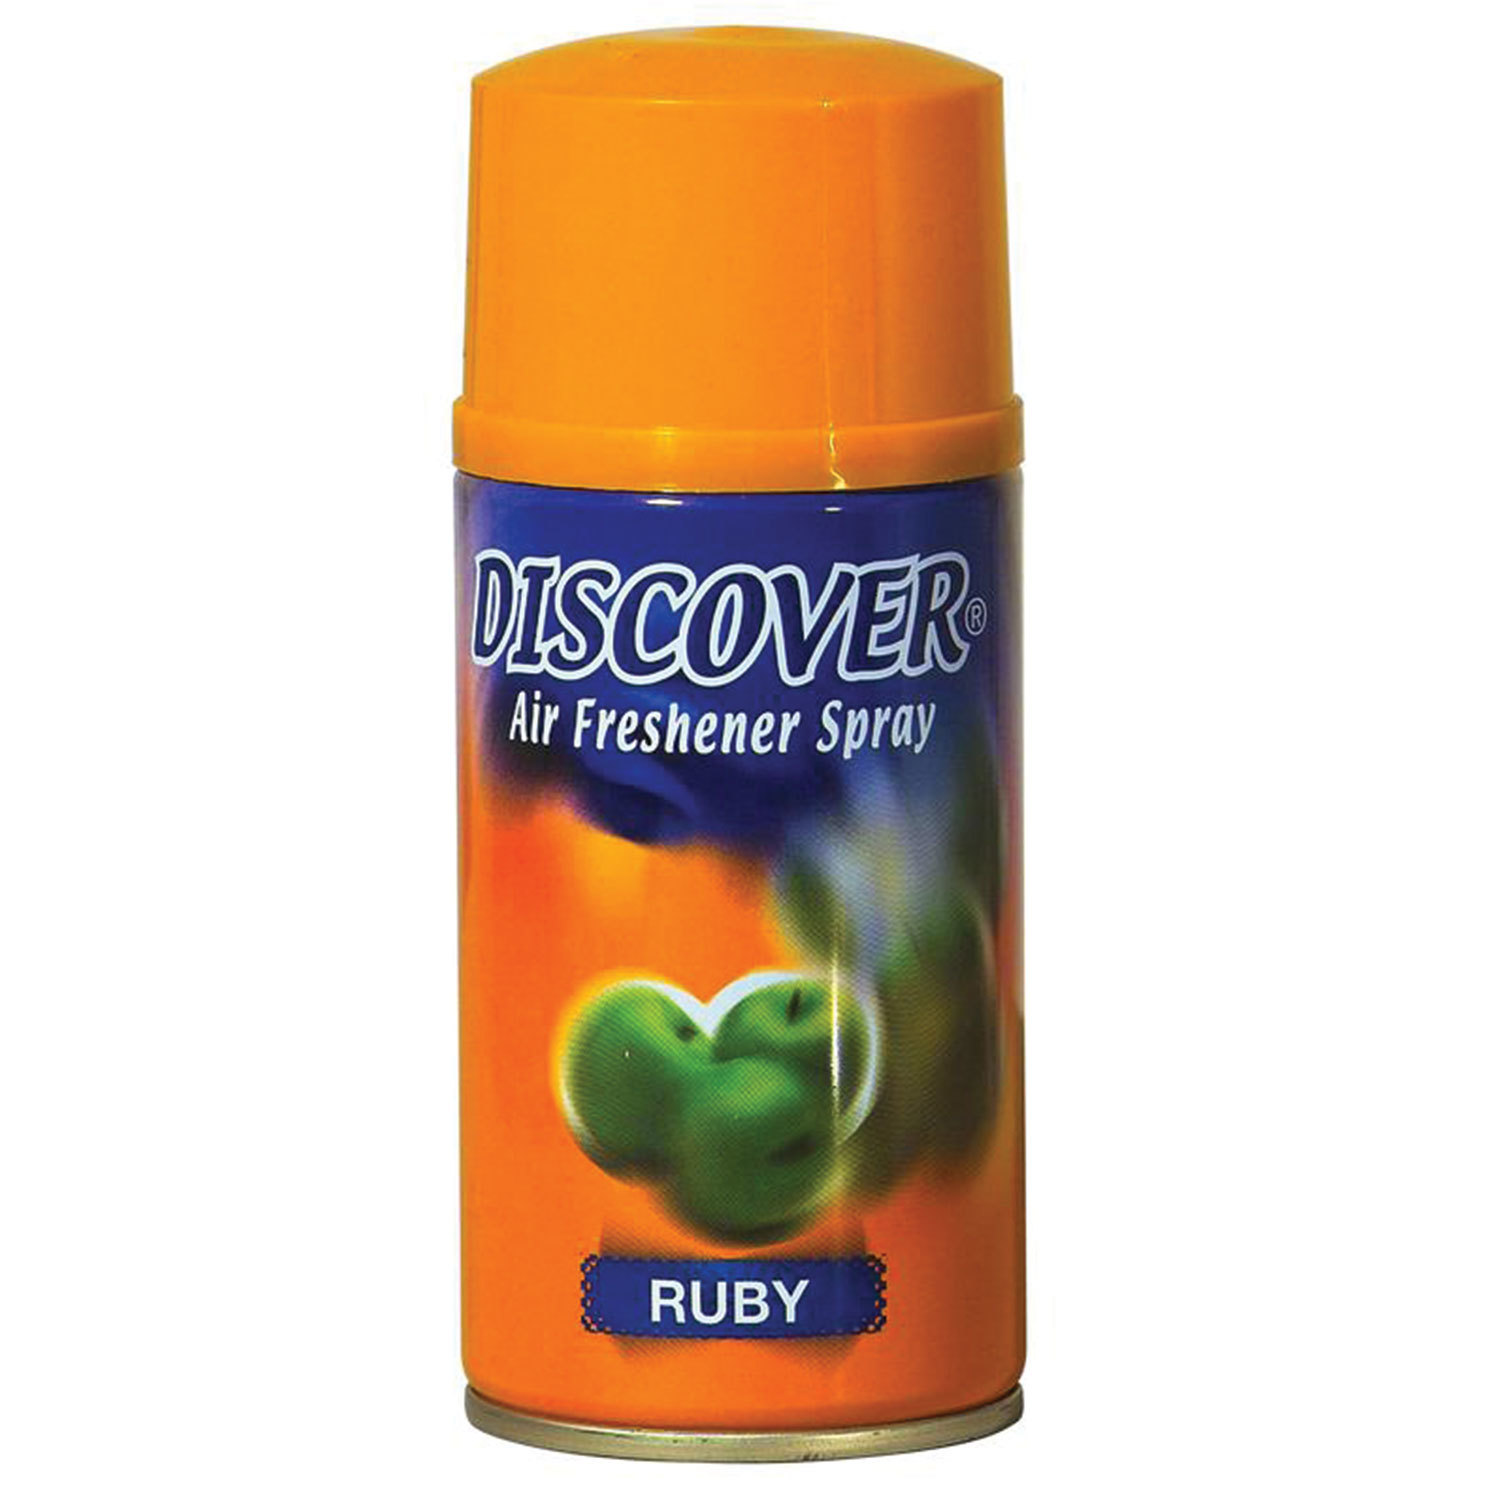   320 , DISCOVER Ruby,  ,   DISCOVER